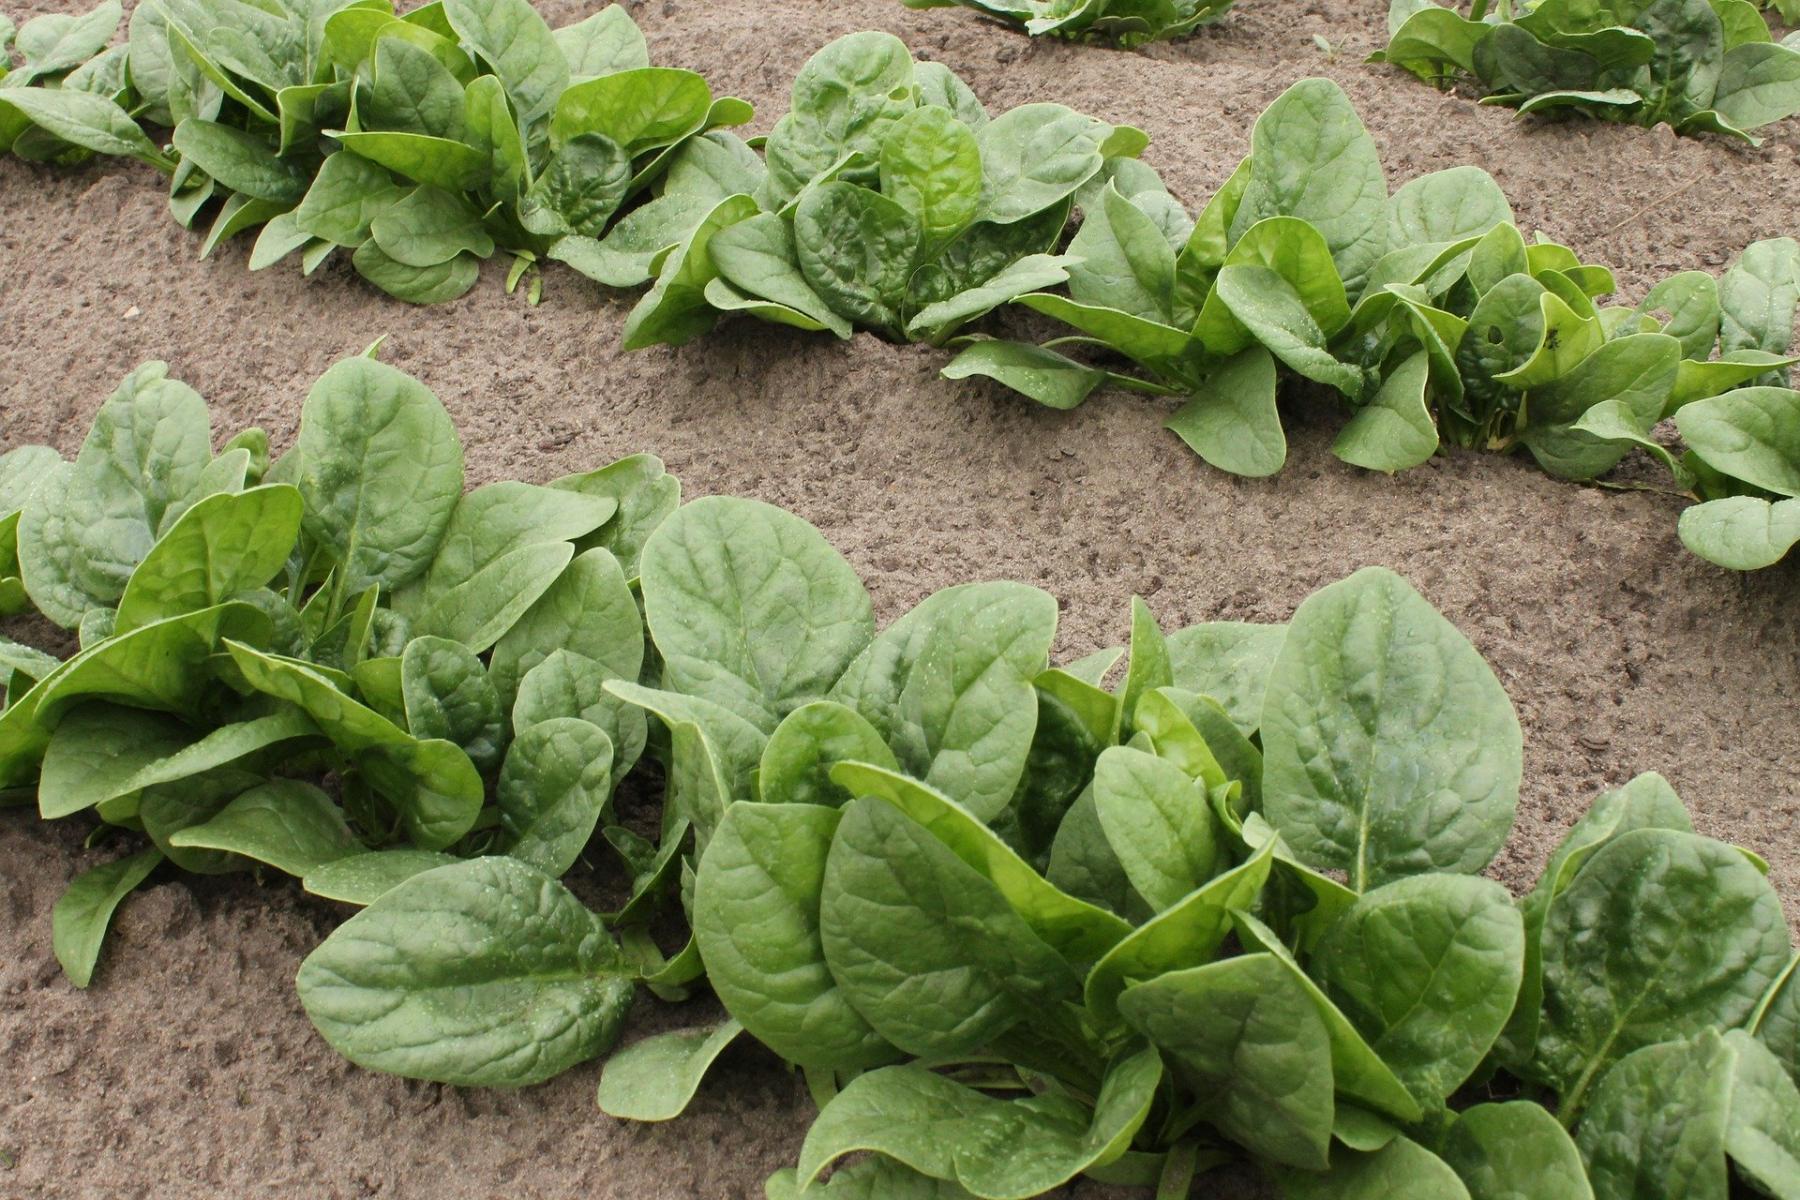 Image of spinach greens. 